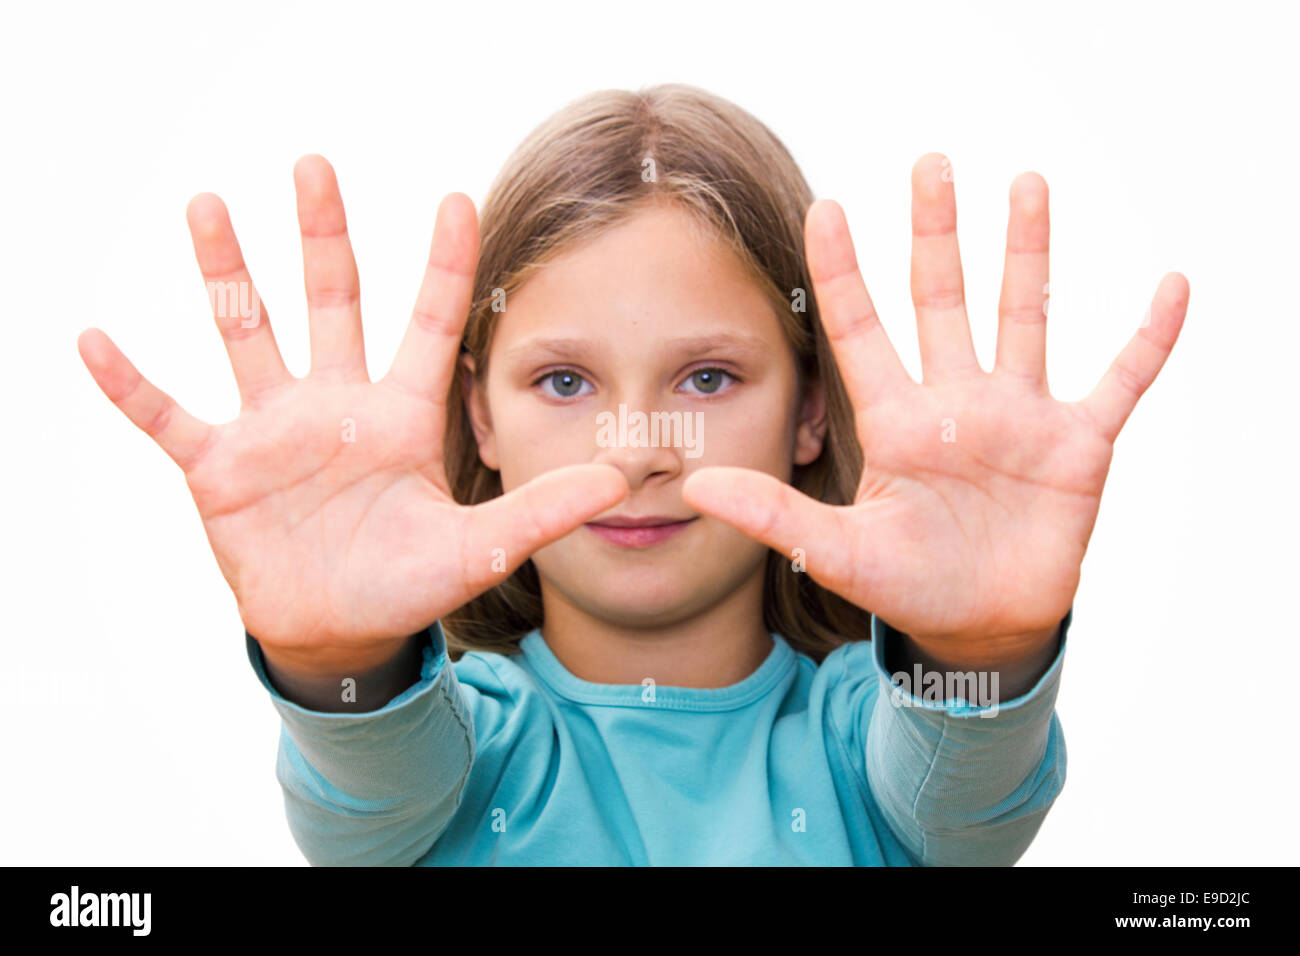 Little girl with long hair shows her ten fingers Stock Photo